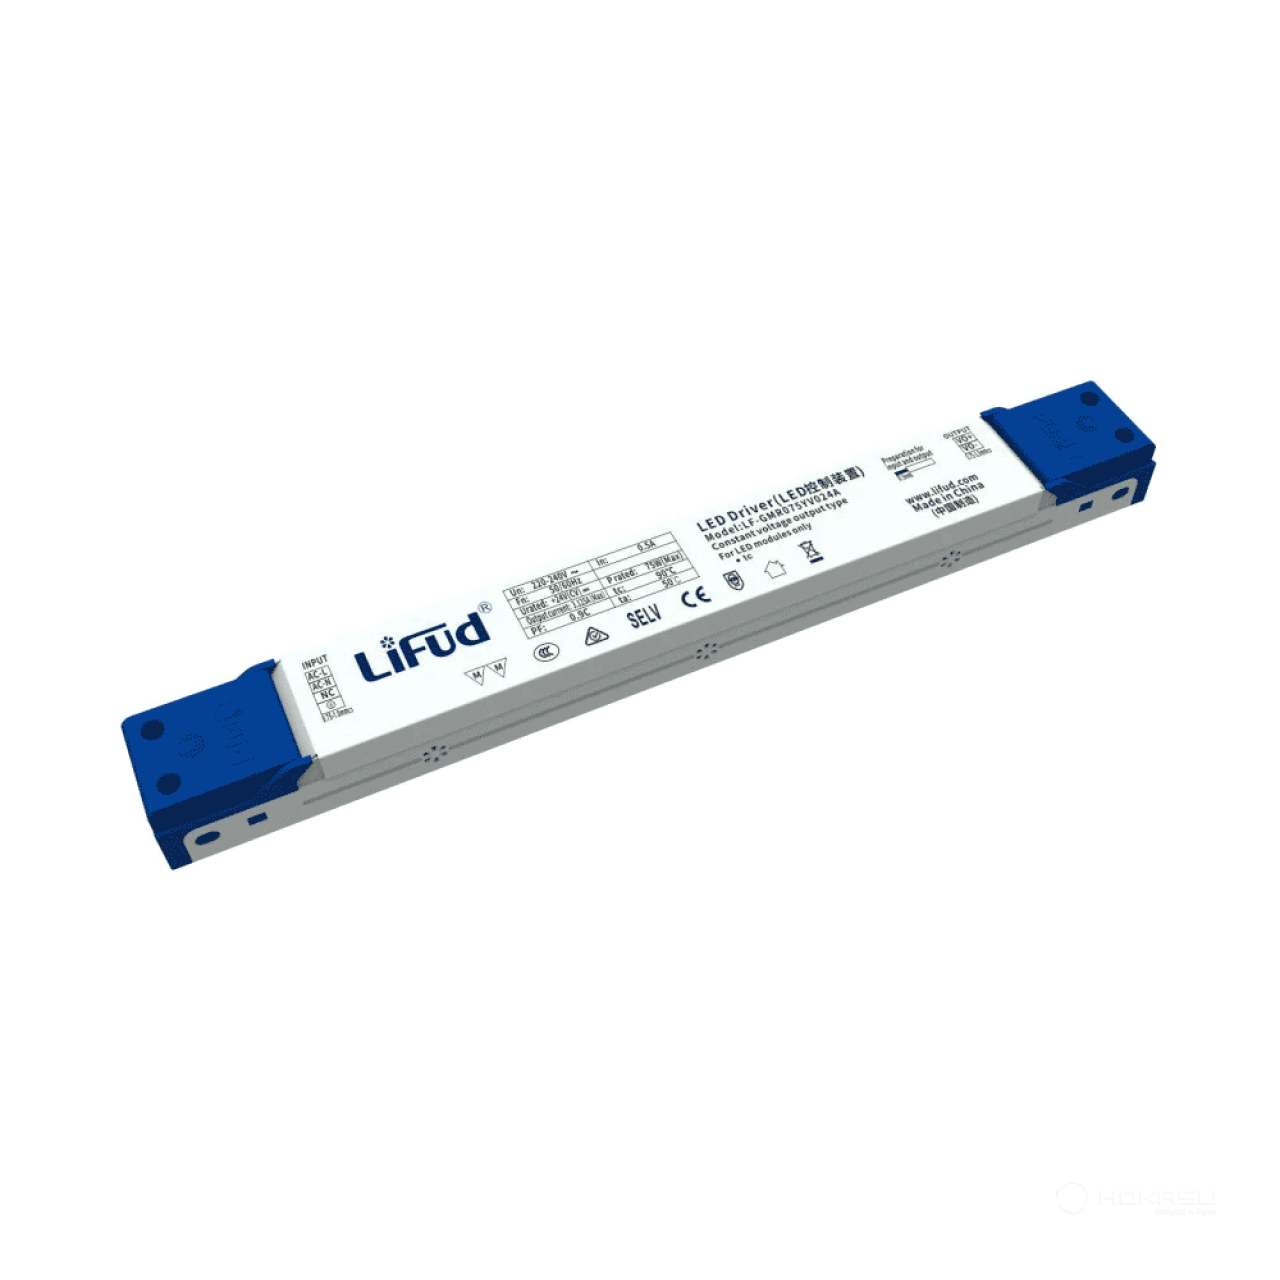 Current source Driver 24V 75W. Isolated LED driver for Class I LED luminaires, flicker-free. Suitable for indoor office lighting, commercial lighting, and decorative lighting. Warranty: 5 years.